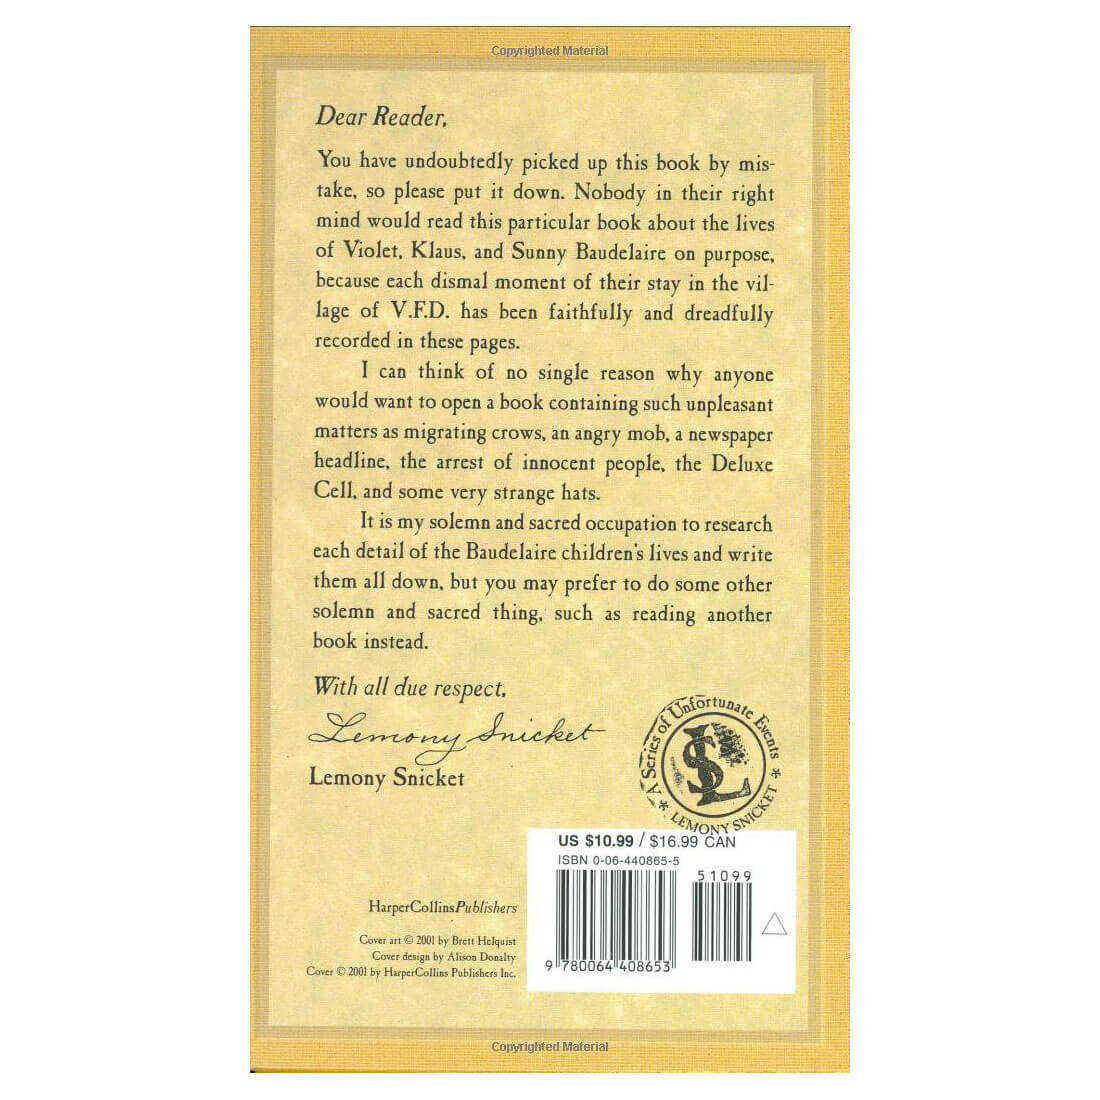 Back view of the Series of Unfortunate Events #7: The Vile Village, A (Hardcover).